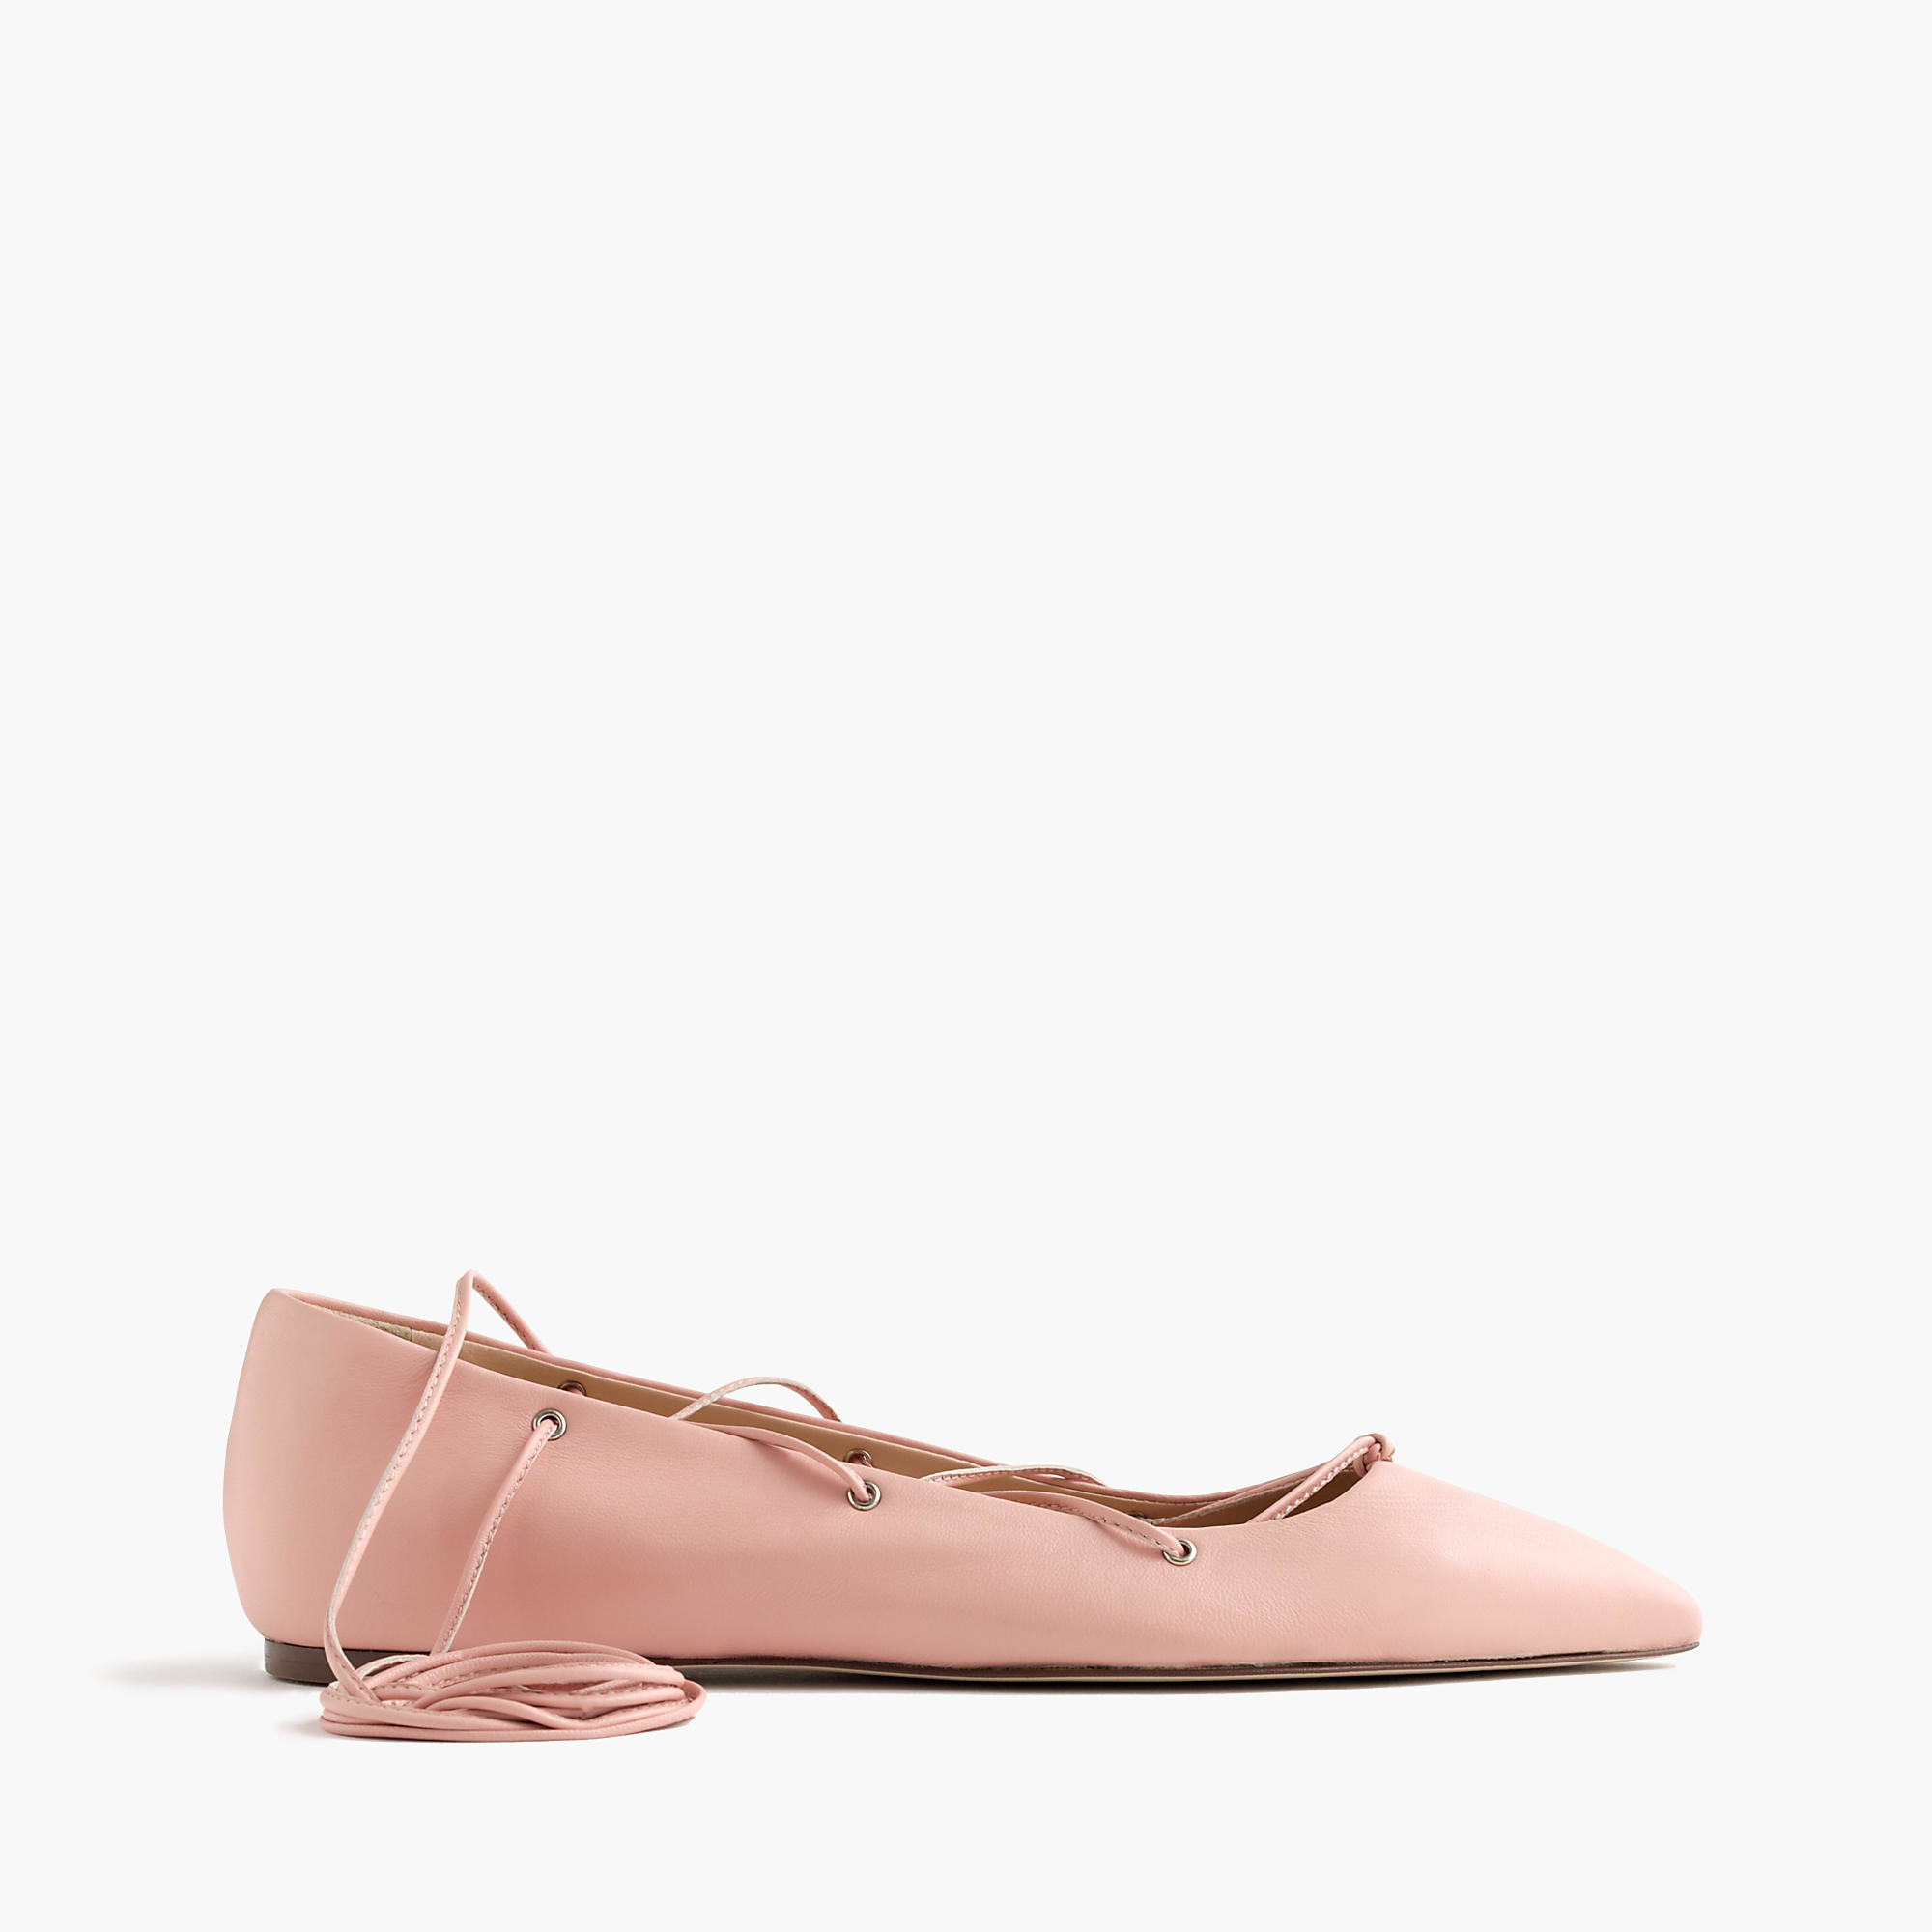 Lyst - J.Crew Leather Lace-up Ballet Flats in Natural